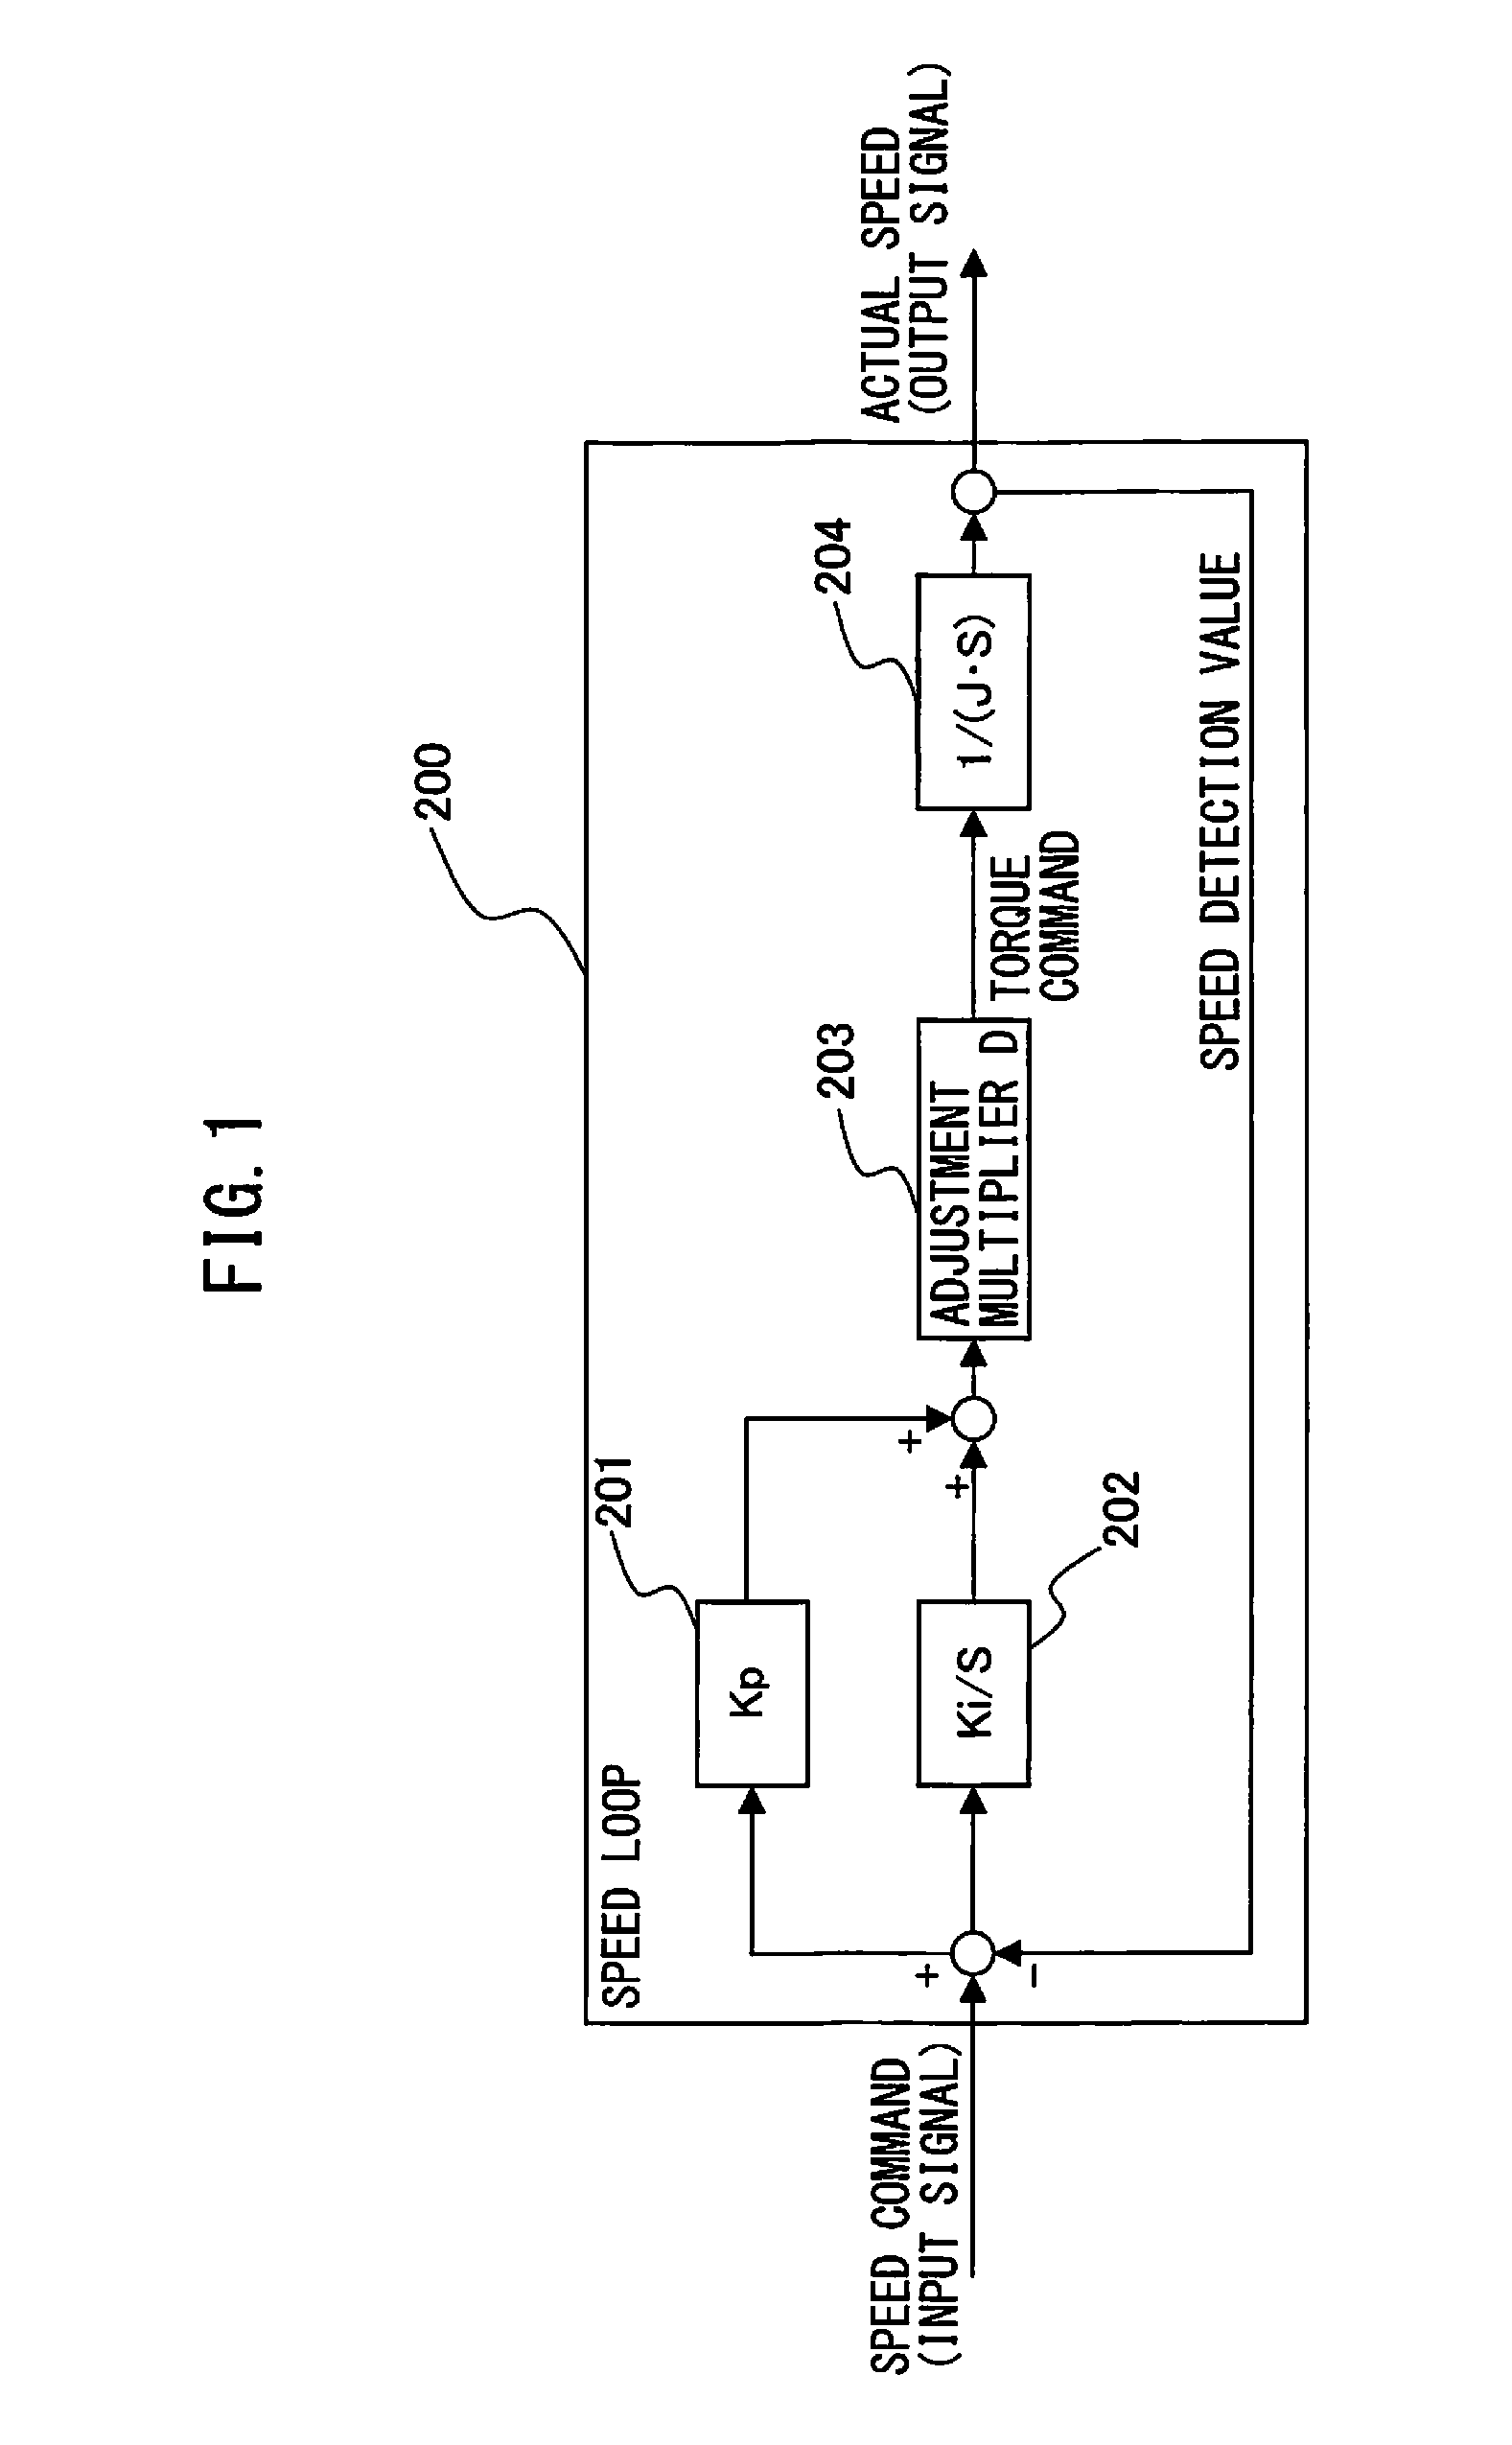 Automatic gain adjustment support device